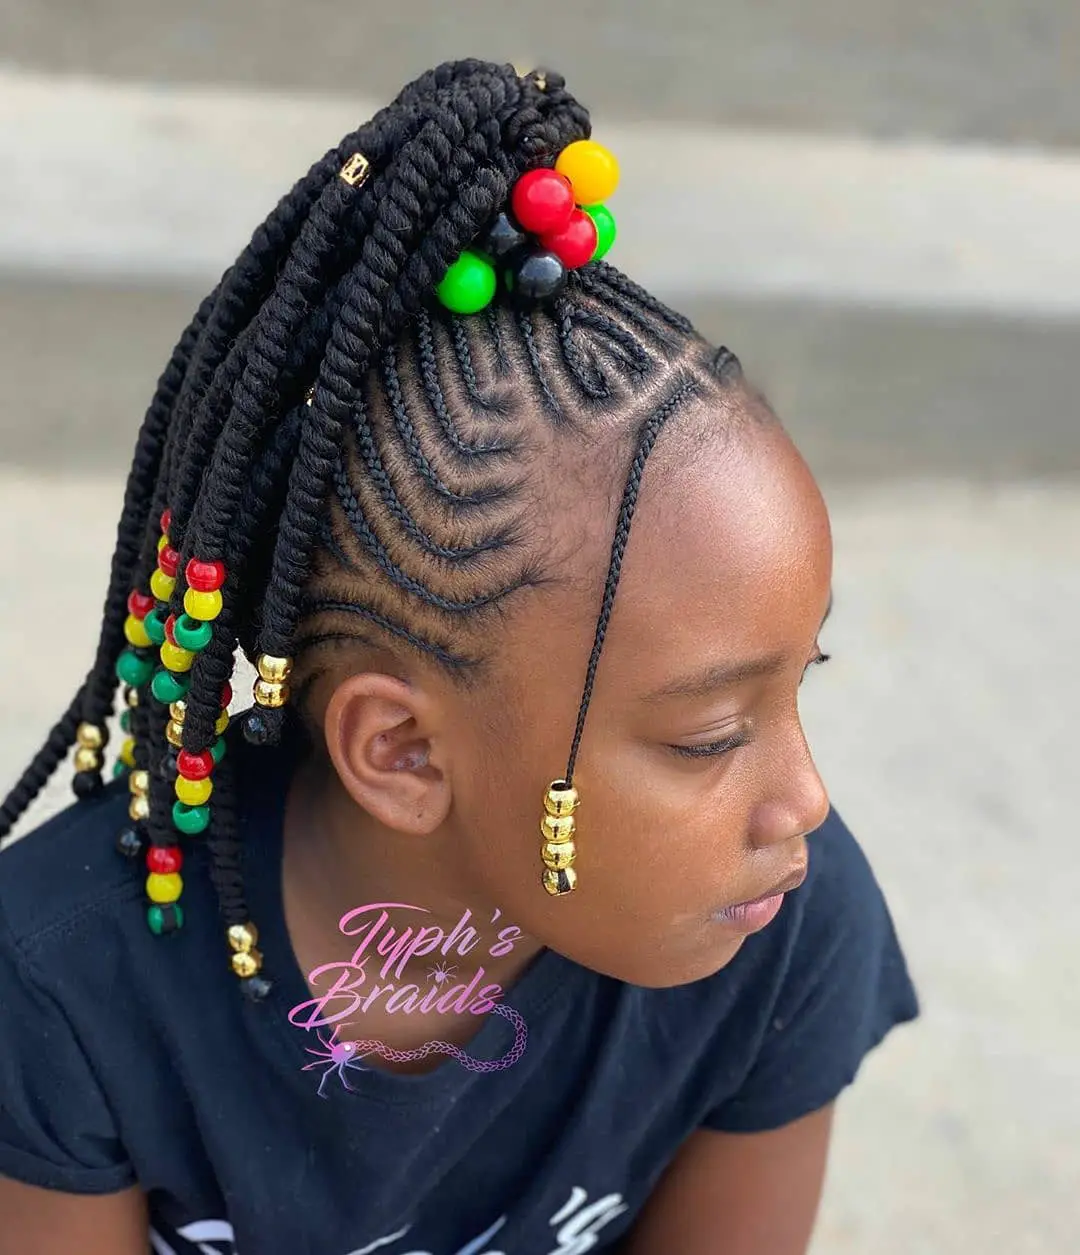 55 Cool Haircuts For Kids To Get in 2023